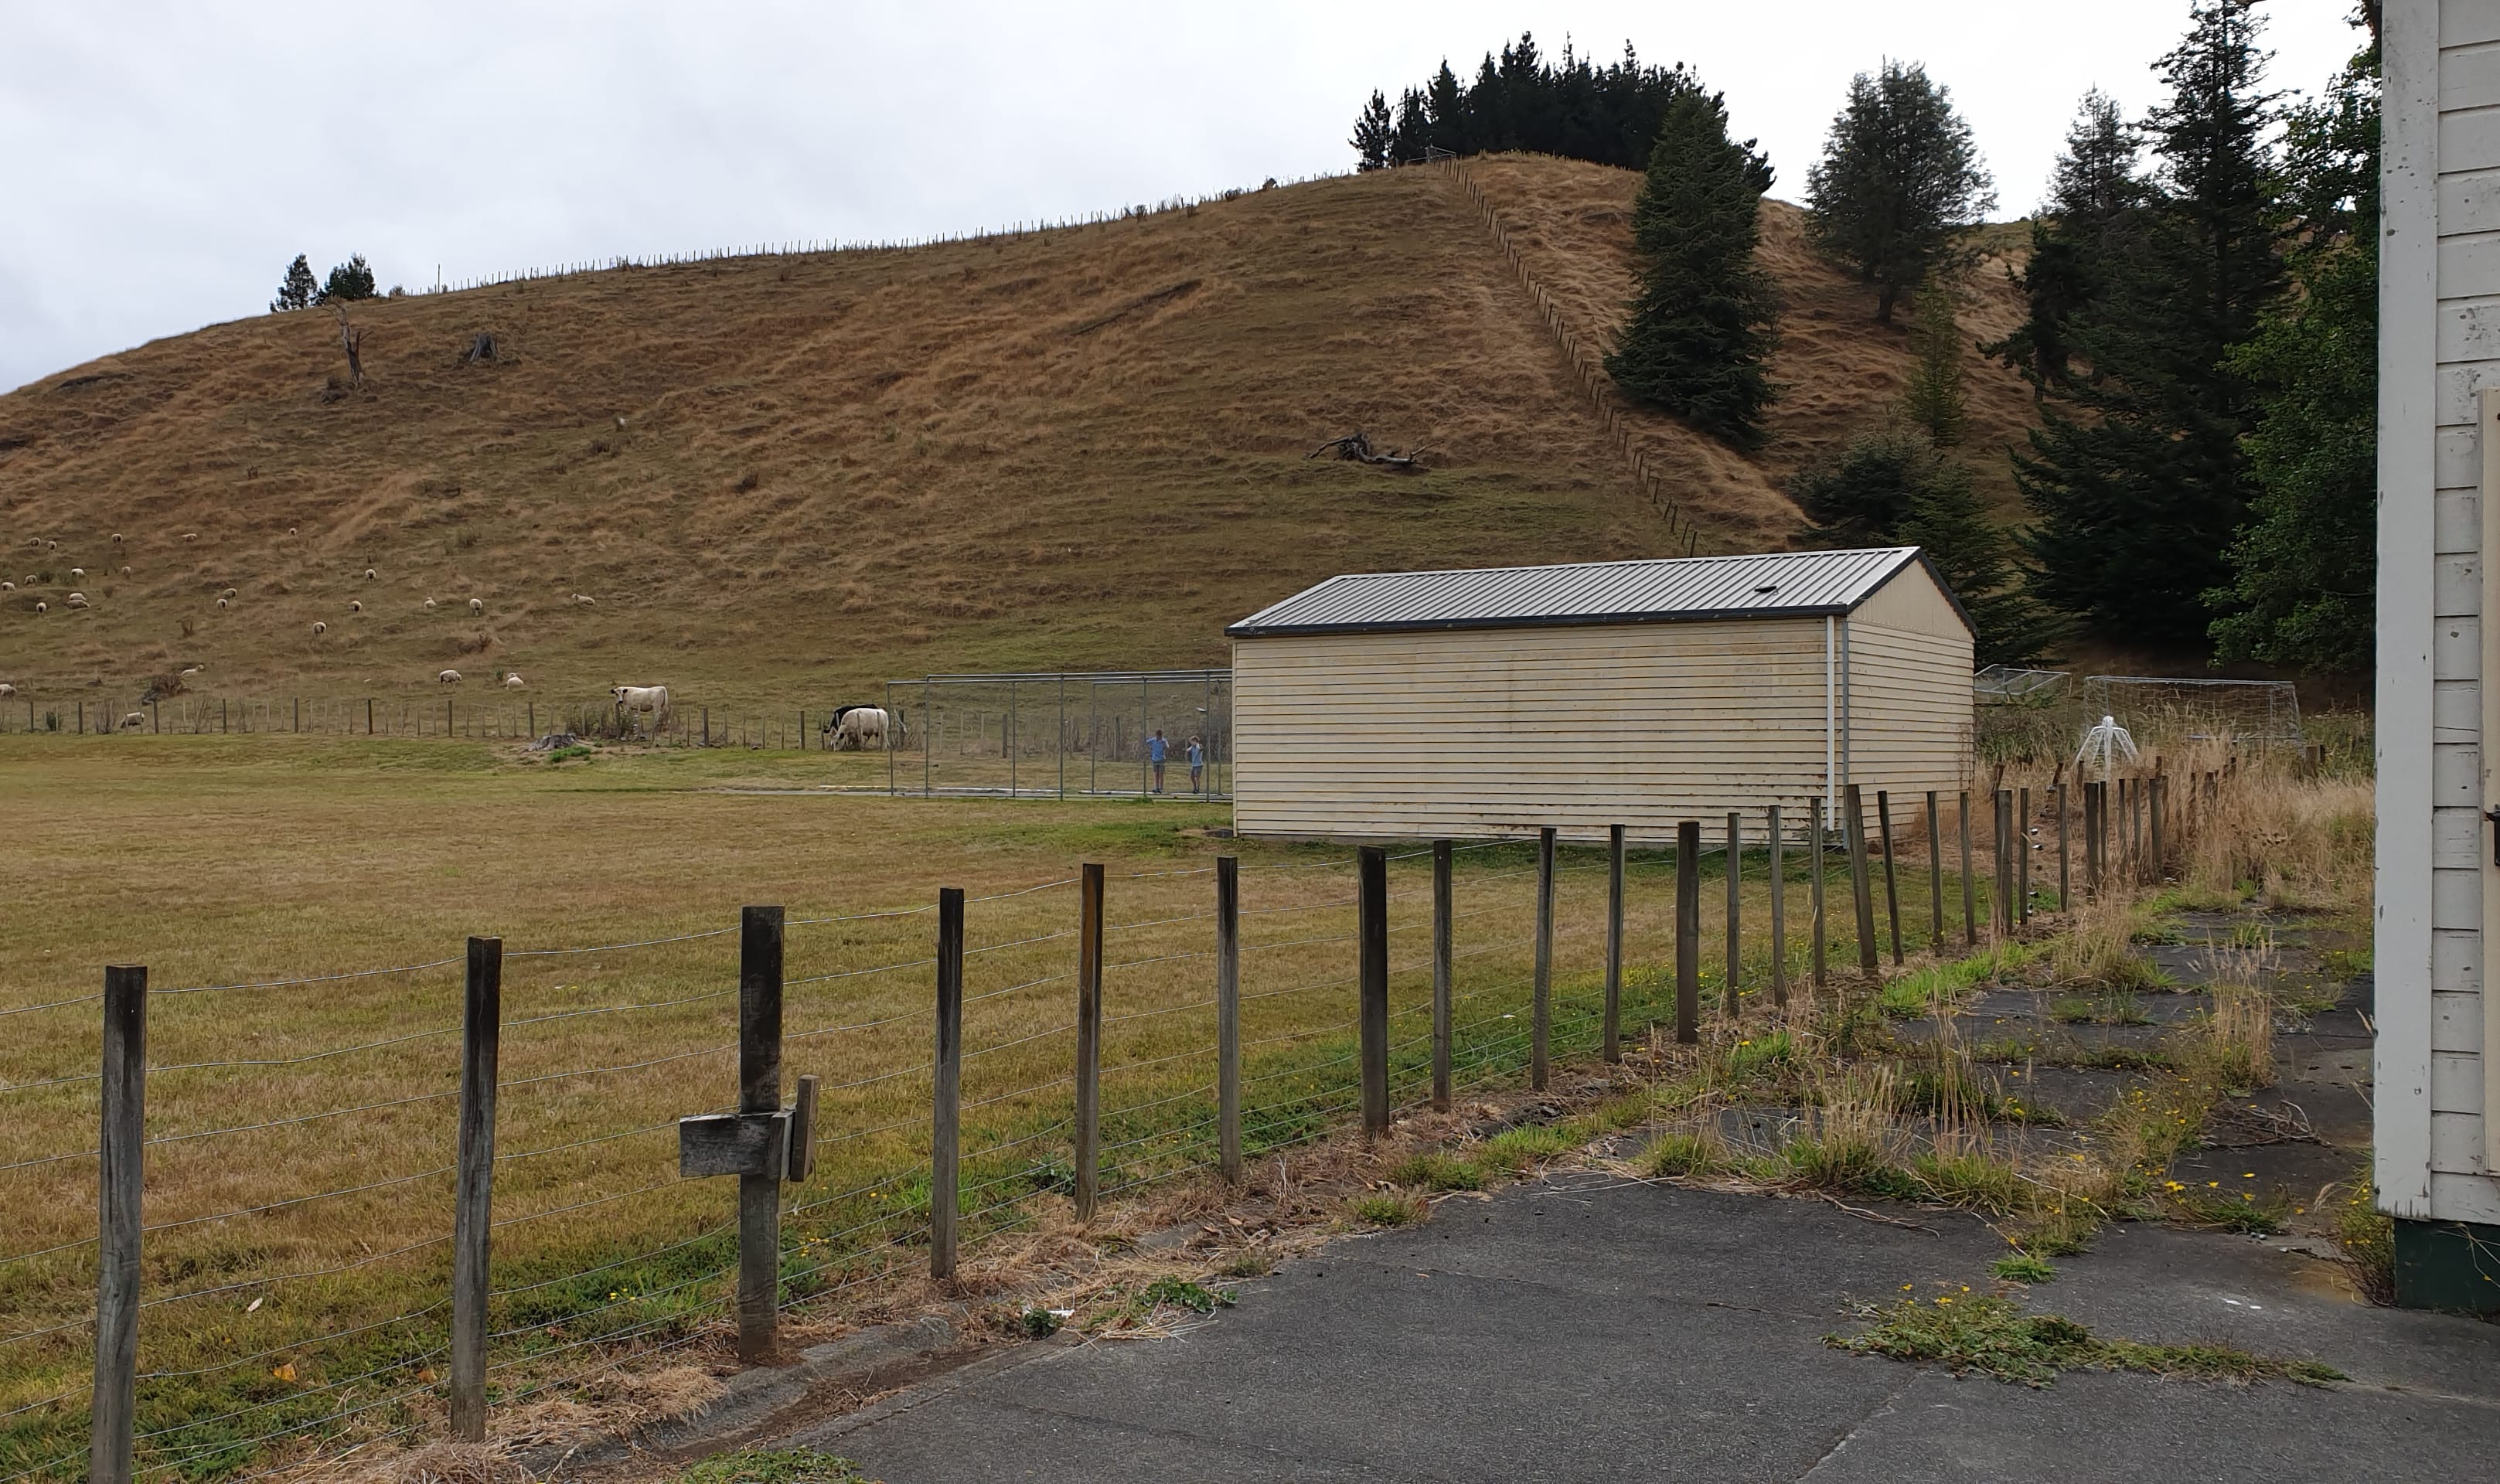 The teaching farm, once owned by the college and now leased by Taihape Area School.